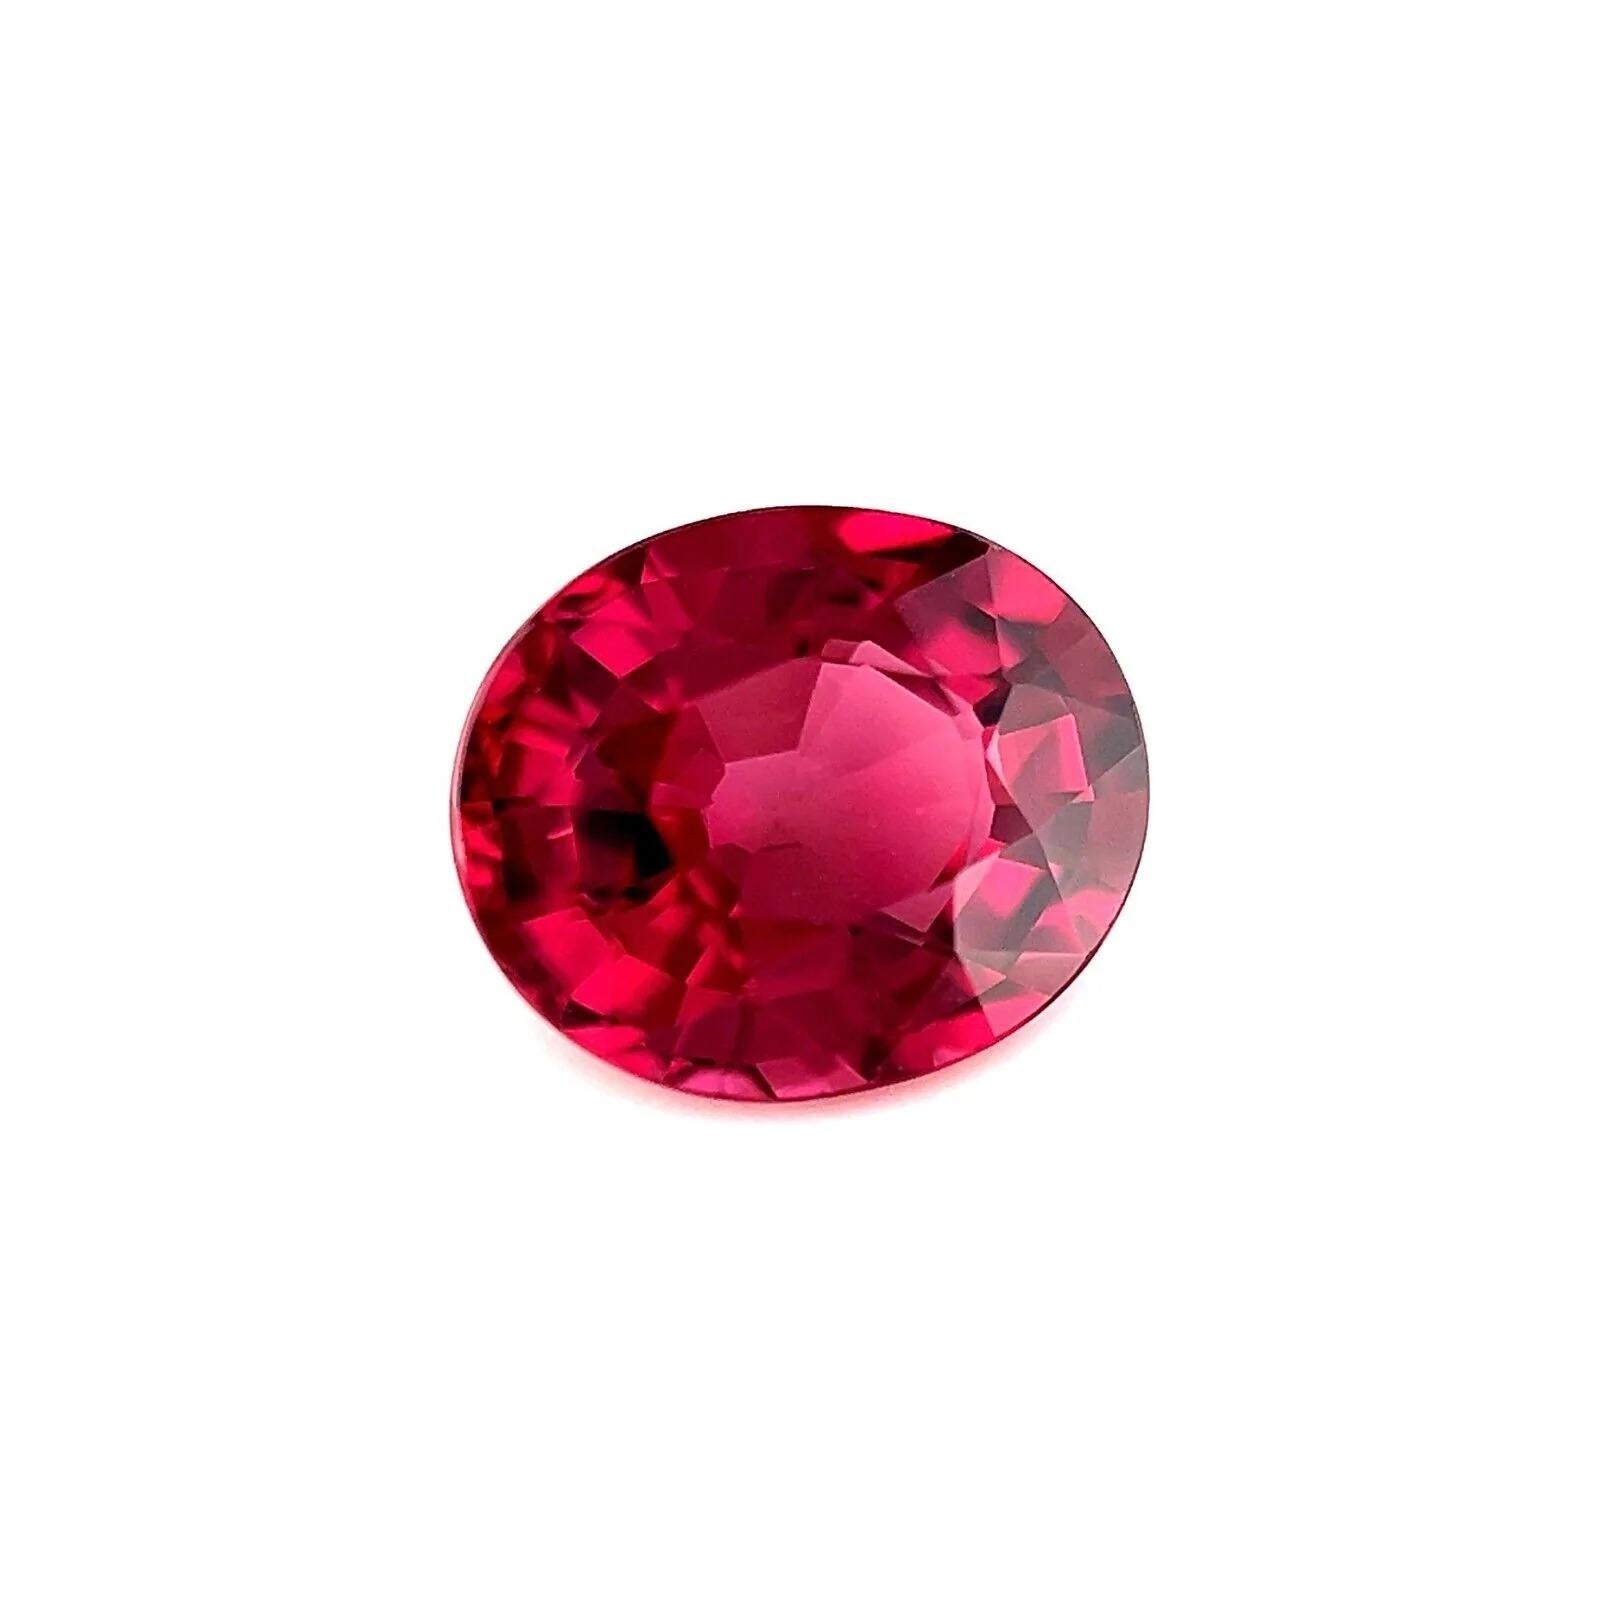 Fine 2.01ct Vivid Pink Purple Rhodolite Garnet Oval Cut 8.2x6.6mm Loose Gem IF

Fine Natural VIVID Pink Purple Rhodolite Garnet Gem. 
2.01 Carat with a beautiful VIVID pink purple colour and excellent clarity, a very clean stone. IF. Also has an